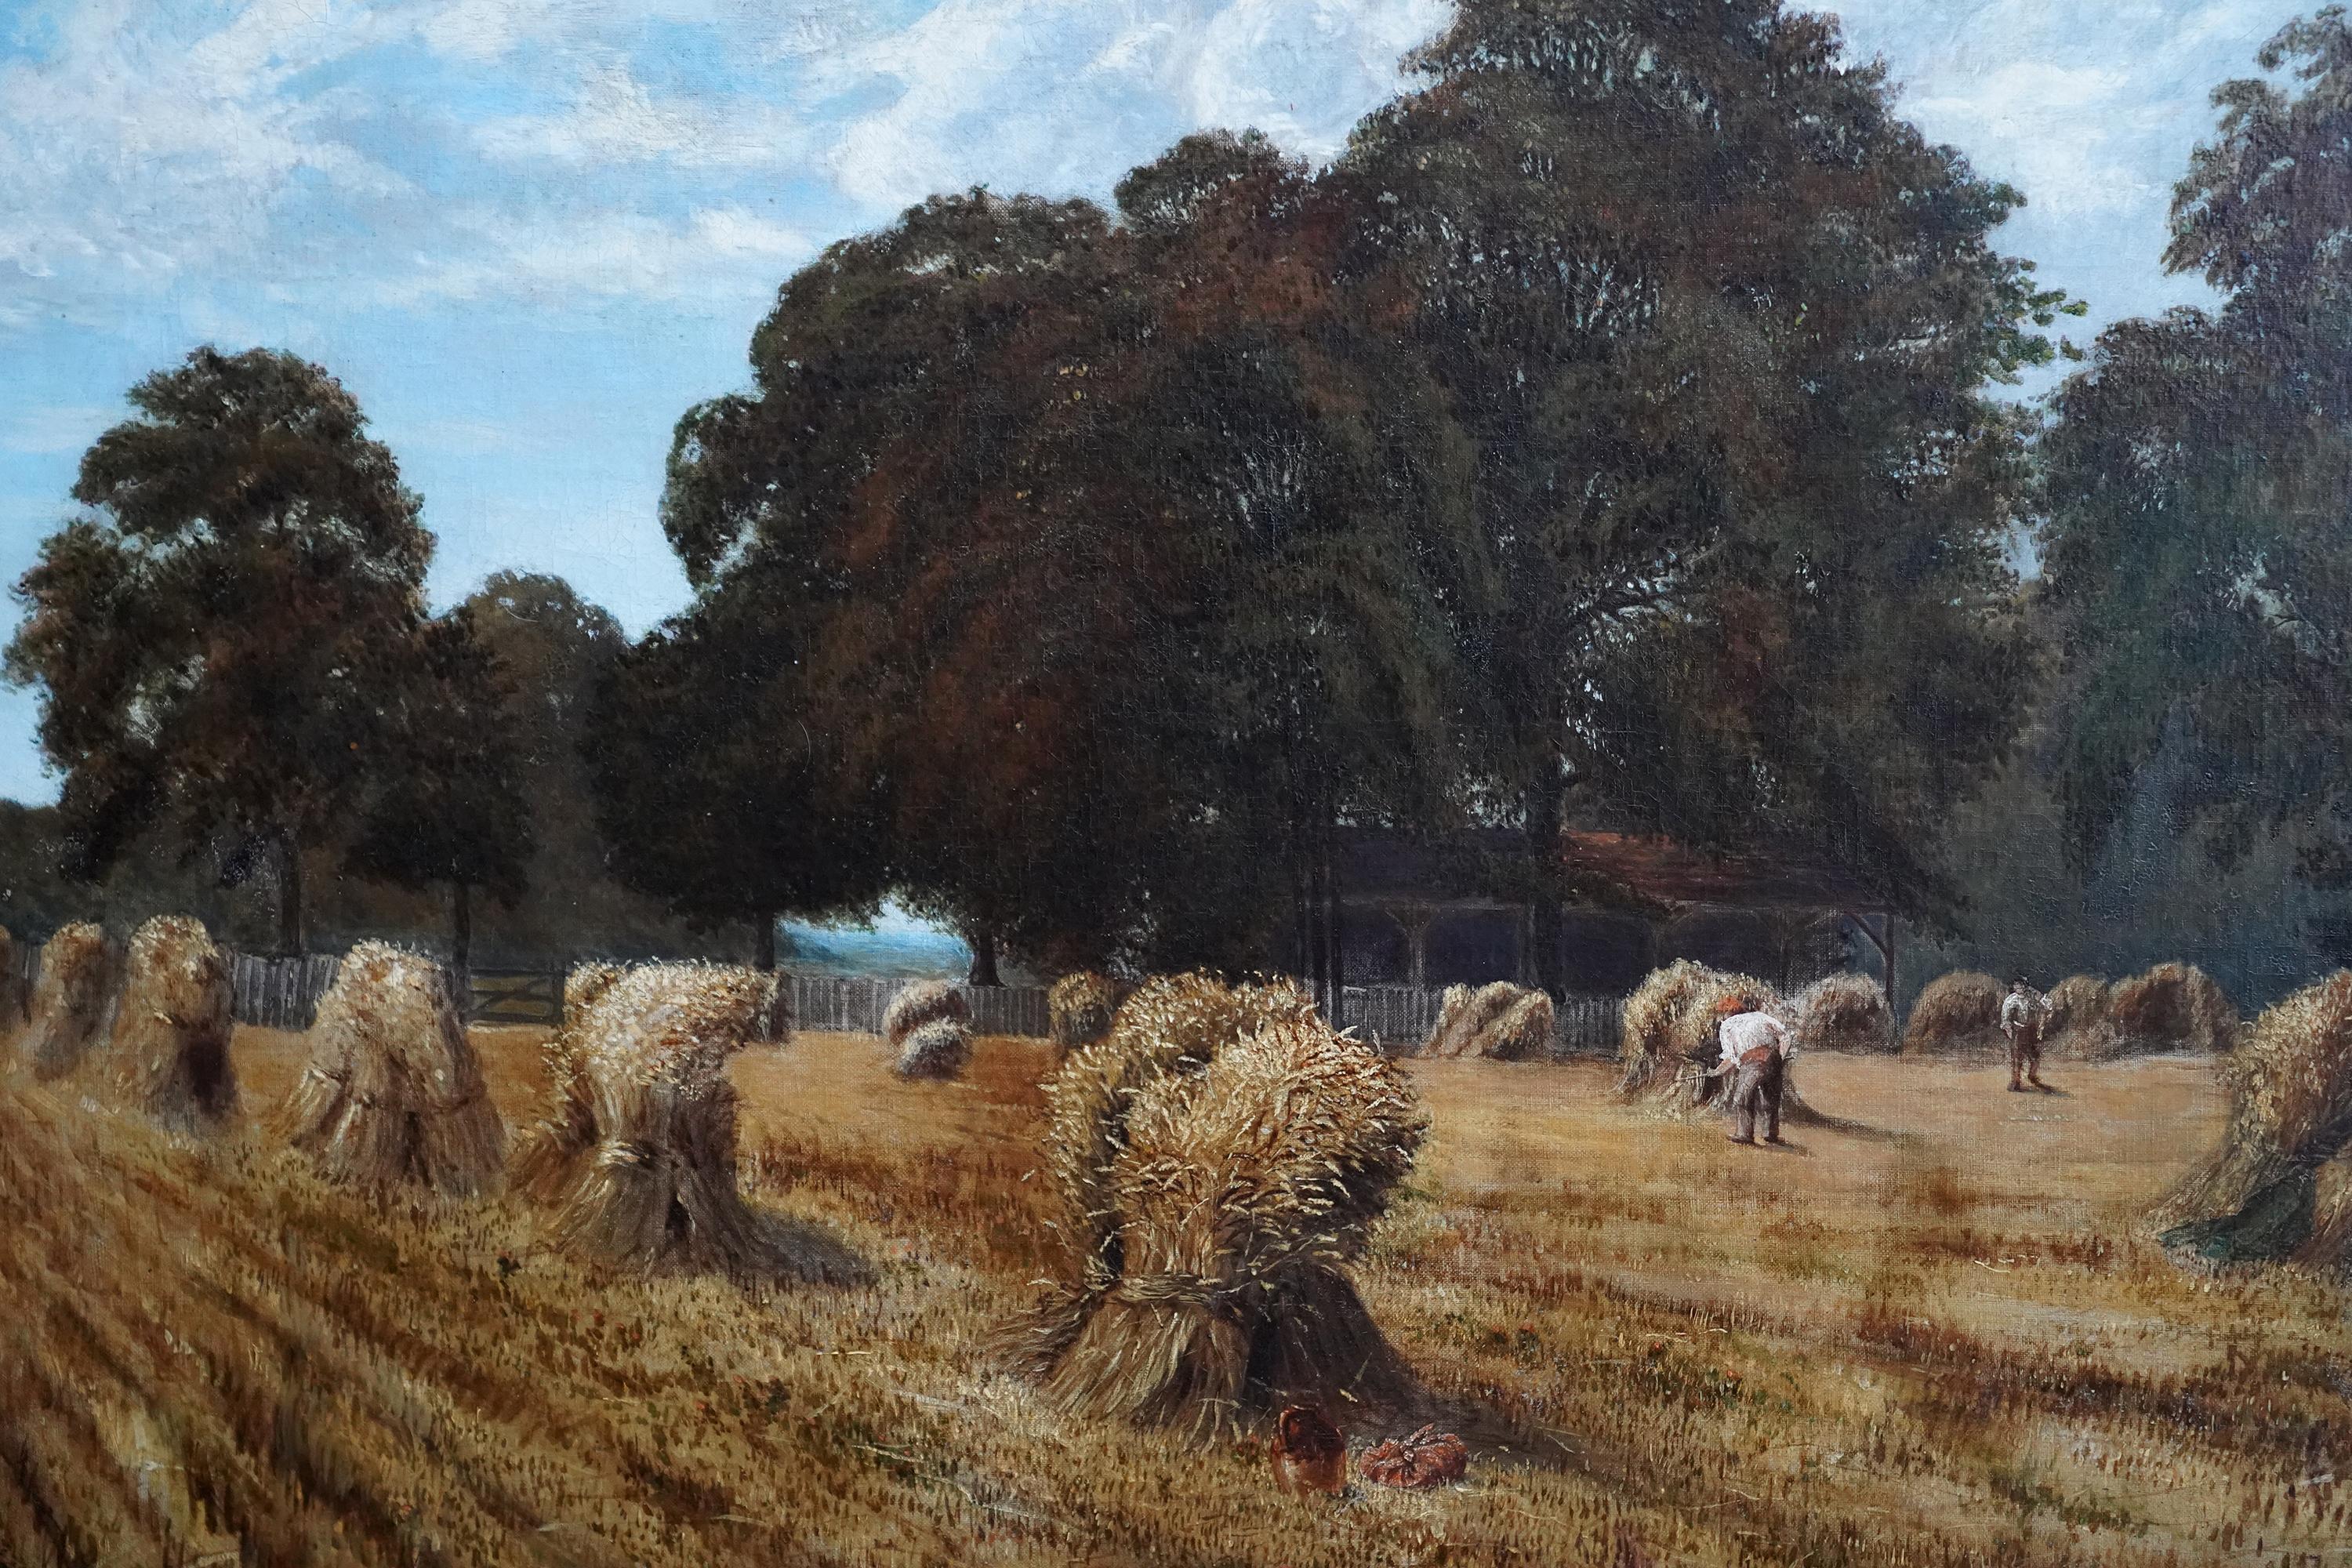 This lovely British Victorian landscape oil painting is by attributed to artist Keeley Halswelle. Painted in 1883 it is a large harvest scene with wheat sheaves in a field in the foreground and labourers working. The field is lined with tress and